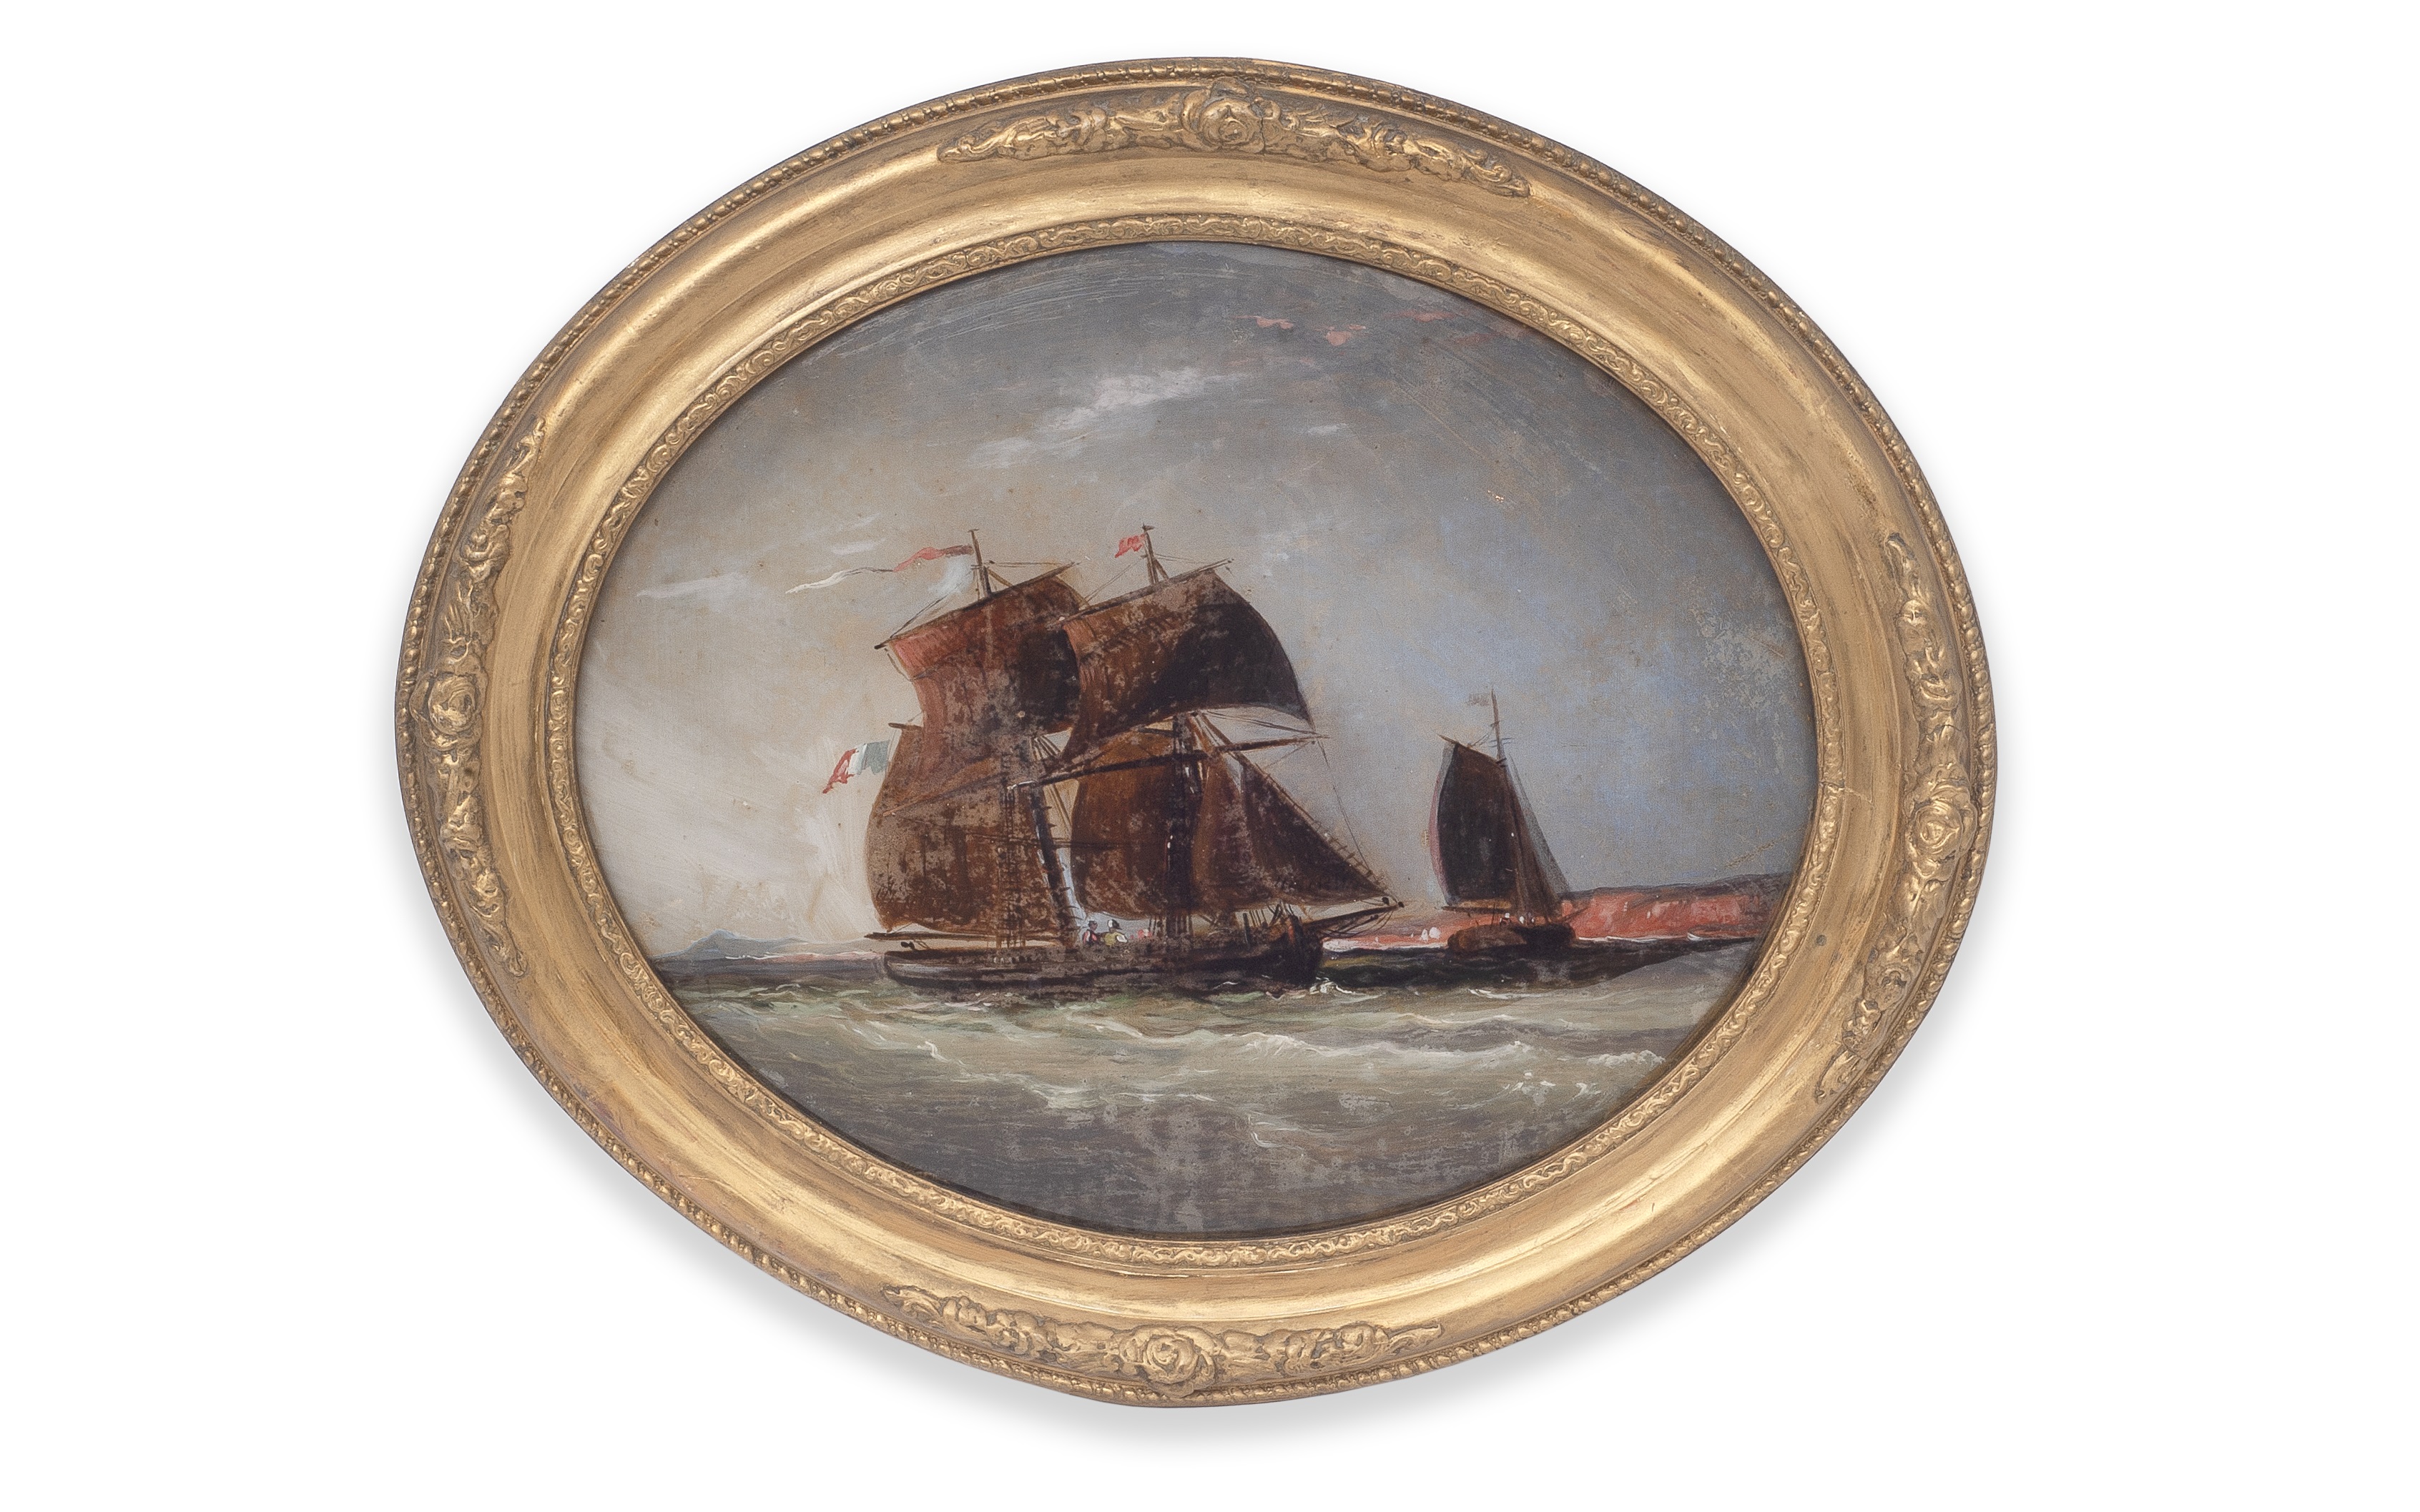 A LATE 19TH CENTURY REVERSE GLASS PAINTING OF A NAPOLEONIC SHIP